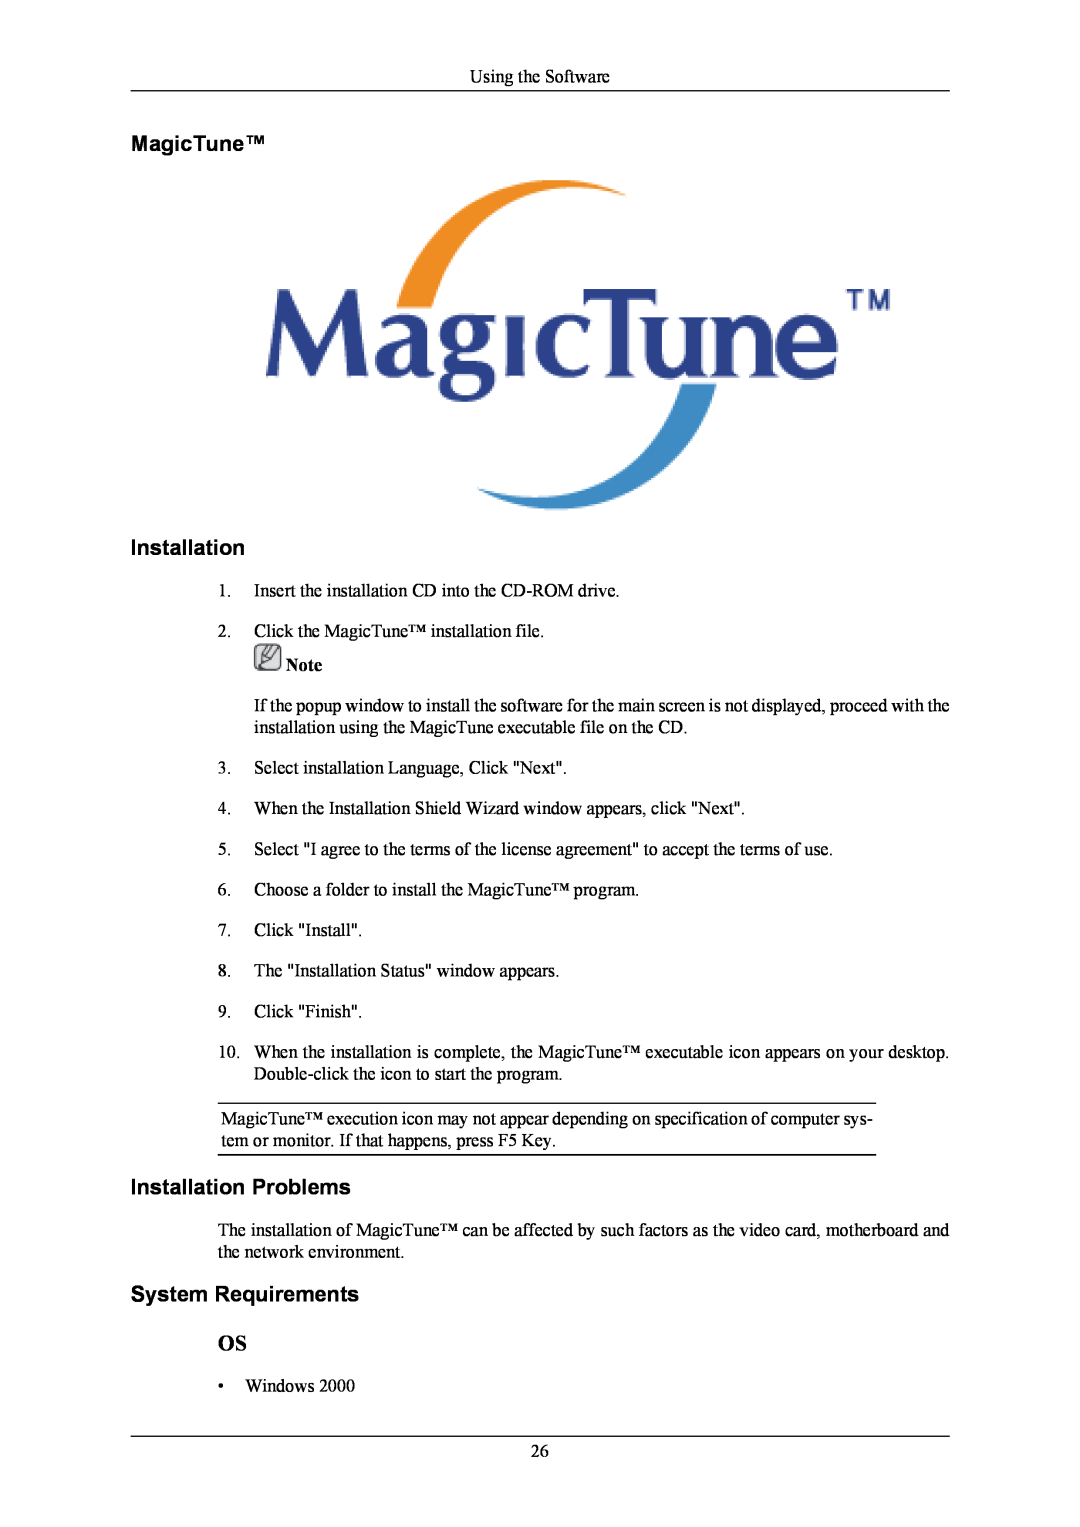 Samsung 2433BW user manual MagicTune Installation, Installation Problems, System Requirements 